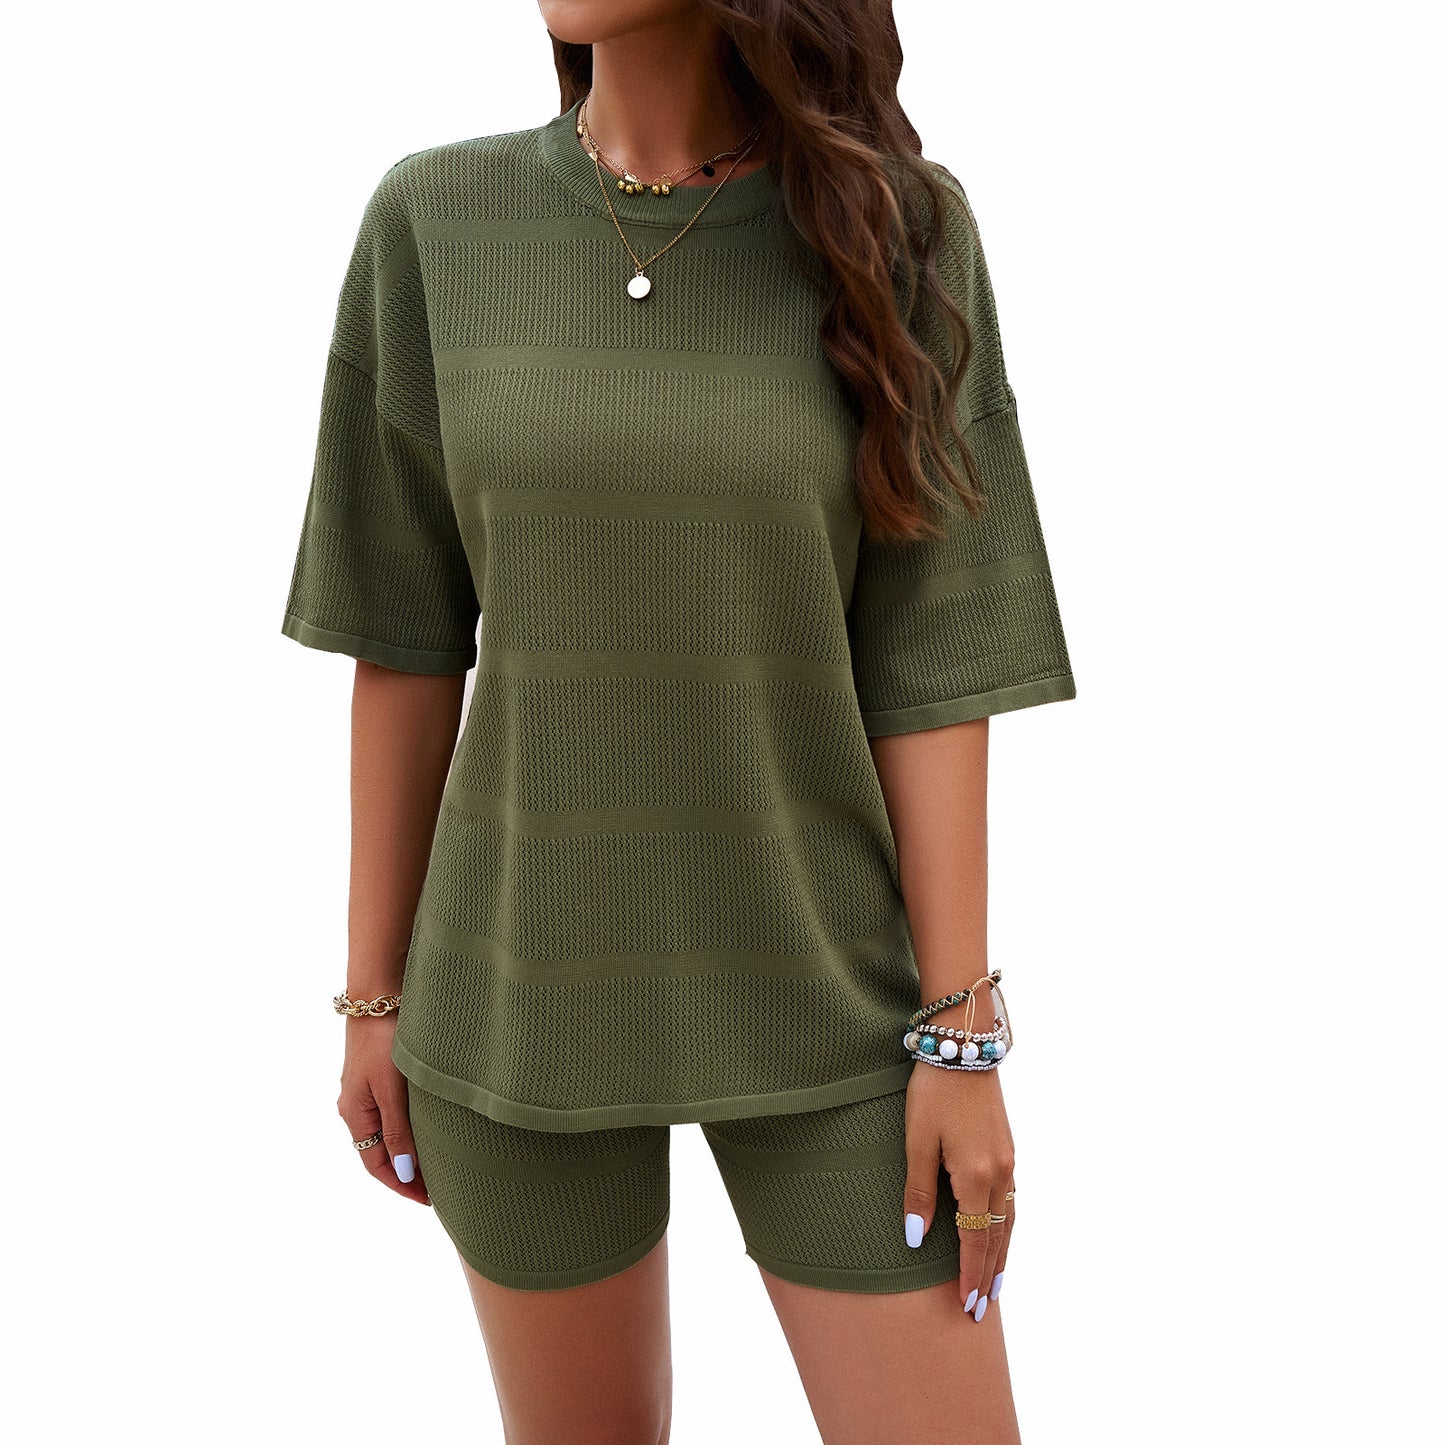 Women's Solid Color Sweater With Short Sleeves Suit